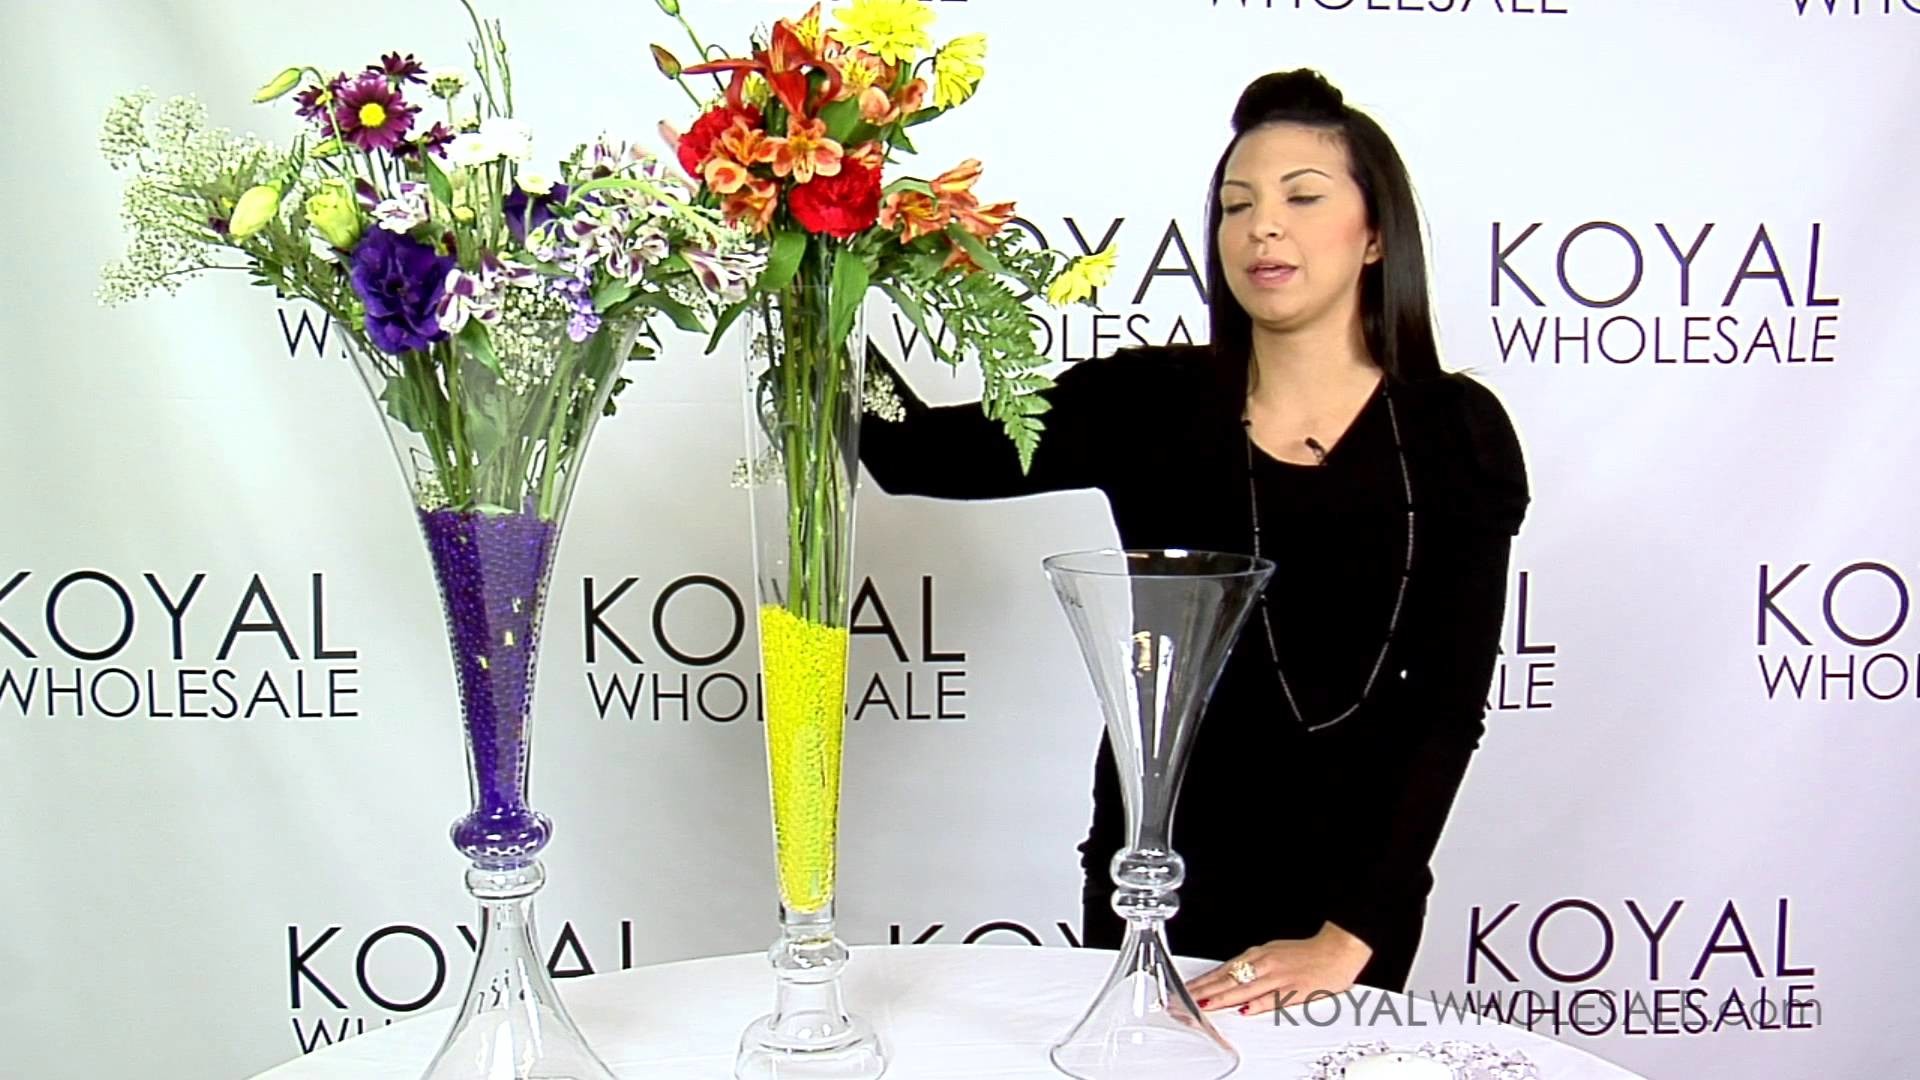 How to Centerpiece Ideas with our Reversible Vases | Weddings & Event Decor by Koyal Wholesale